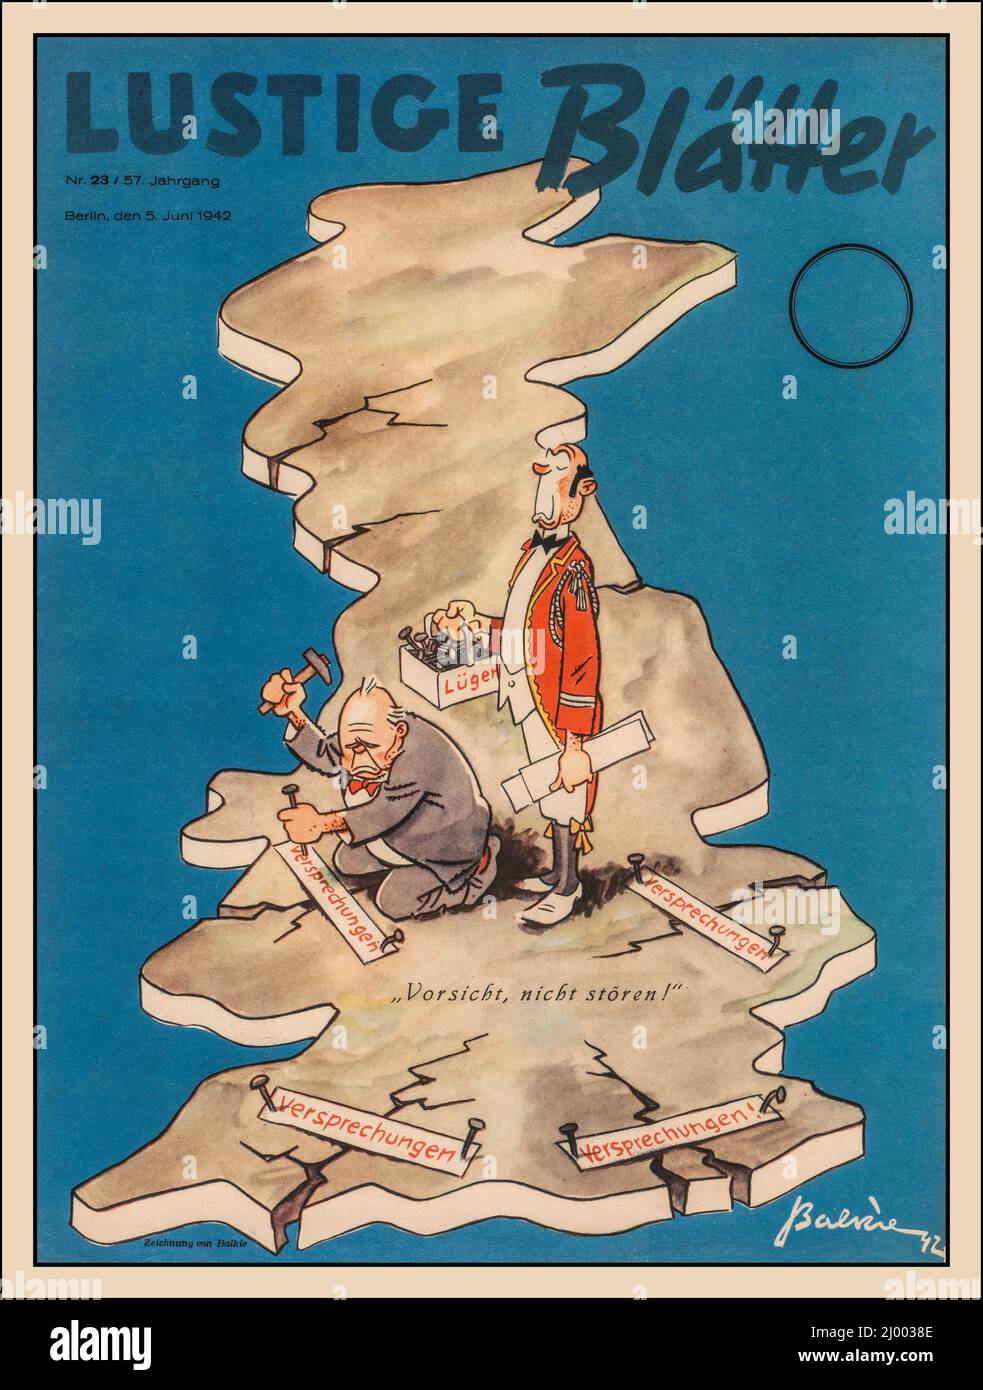 Nazi Germany 1942 WW2 Propaganda Colour illustration of Prime Minister Winston Churchill shown patching up the British Isles with patches titled 'promises'. Main Title 'Caution do not disturb'  World War II Second World War Berlin Nazi Germany Stock Photo